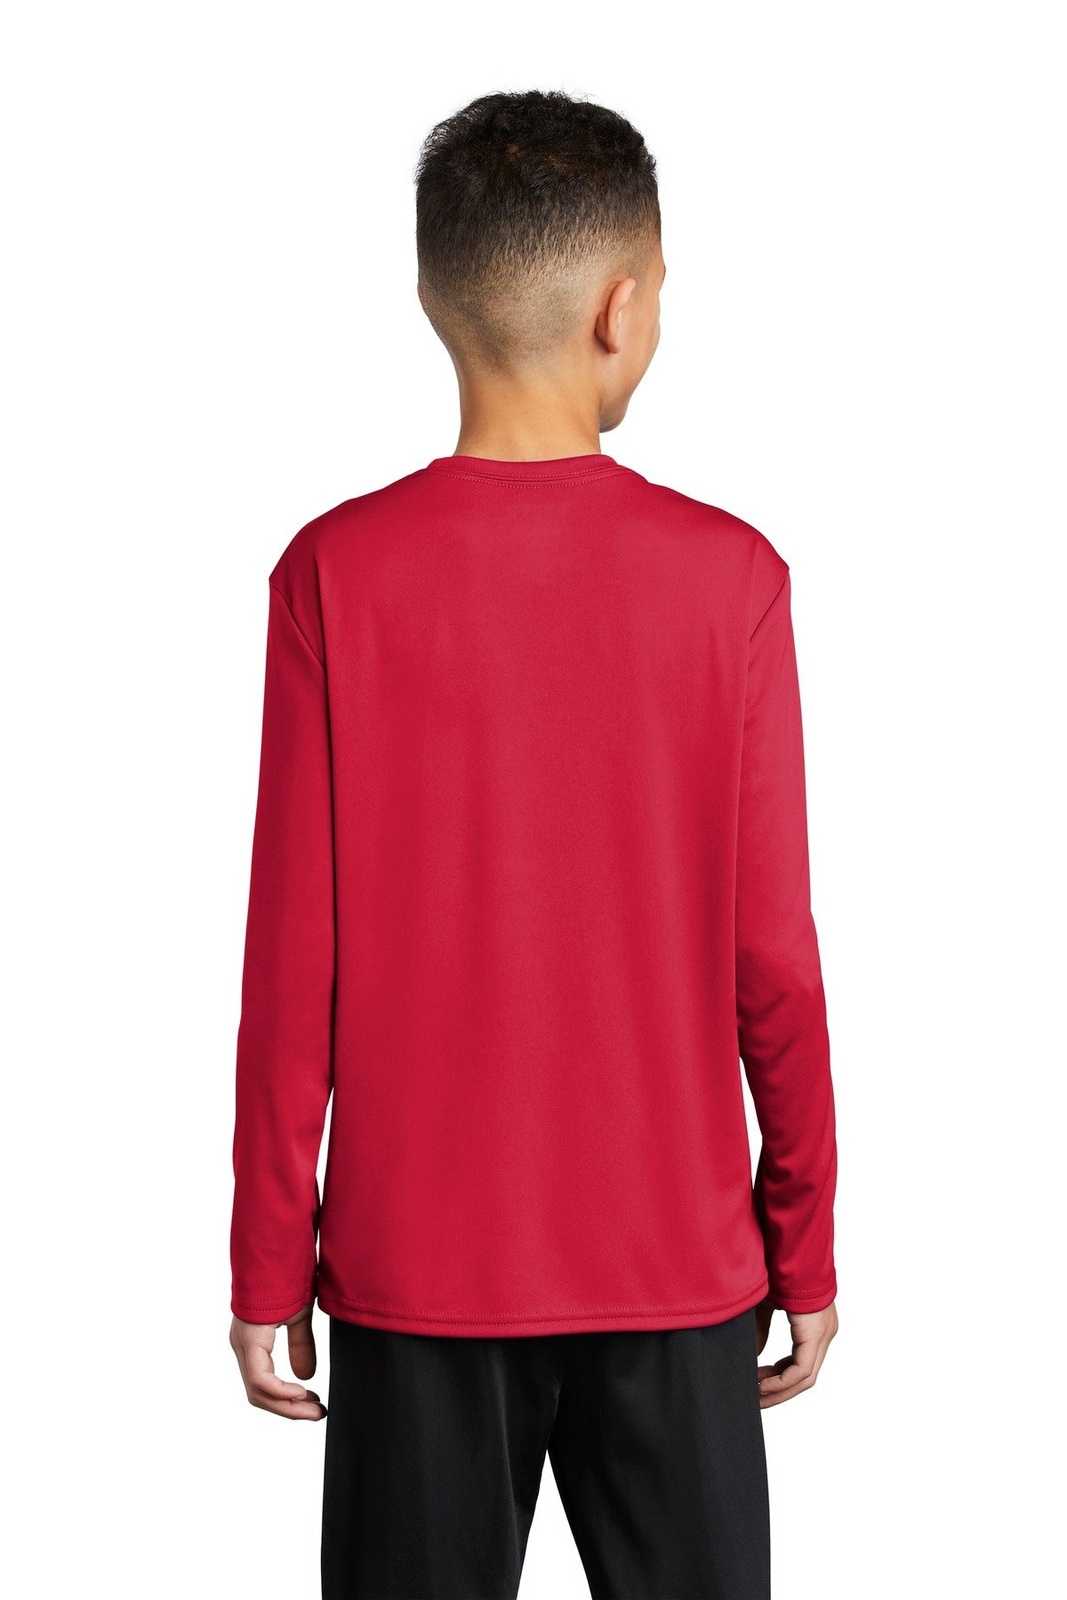 Port &amp; Company PC380YLS Youth Long Sleeve Performance Tee - Red - HIT a Double - 2